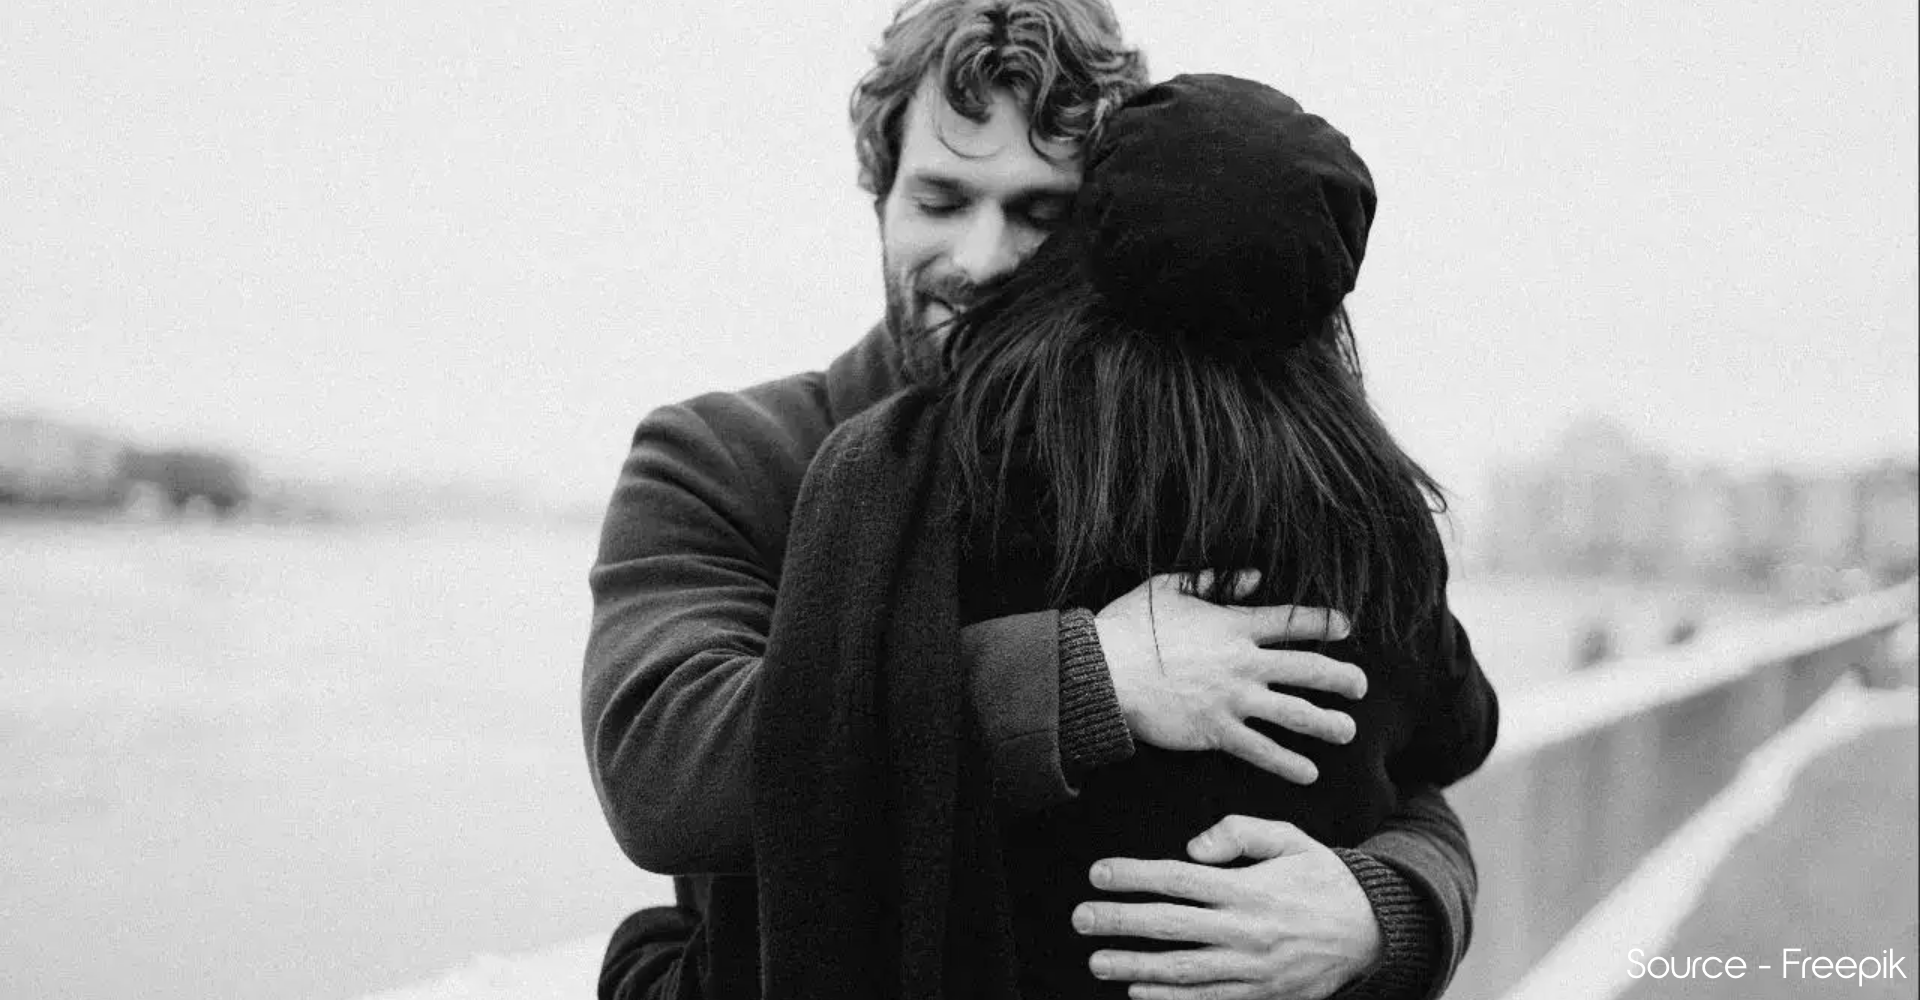 50+ Heartfelt Hug Day Quotes to Embrace Love & Connection